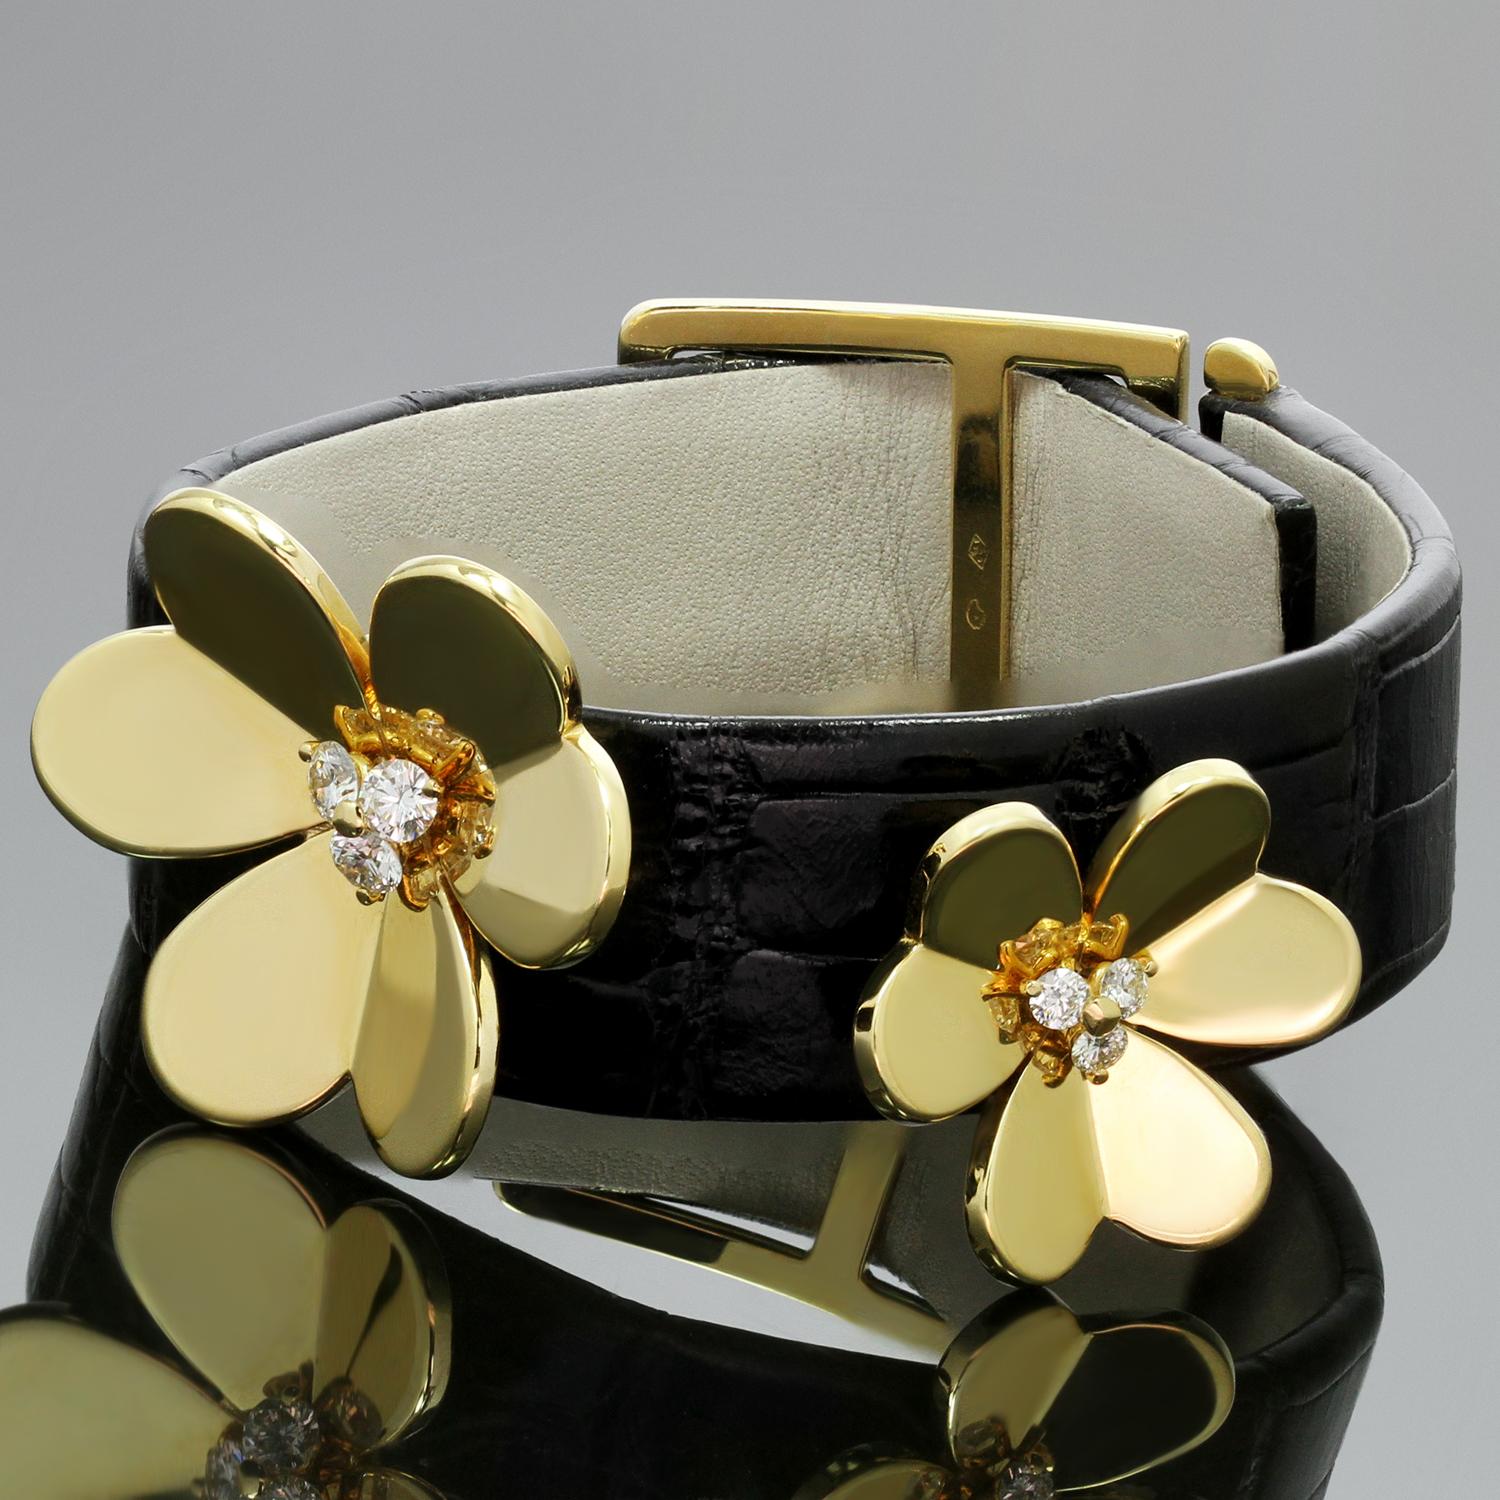 This fabulous Van Cleef & Arpels bracelet from the iconic Frivole collection features an adjustable length black crocodile strap beautifully mounted with graduated 18k yellow gold flowers prong-set with brilliant-cut round E-F VVS1-VVS2 diamonds of